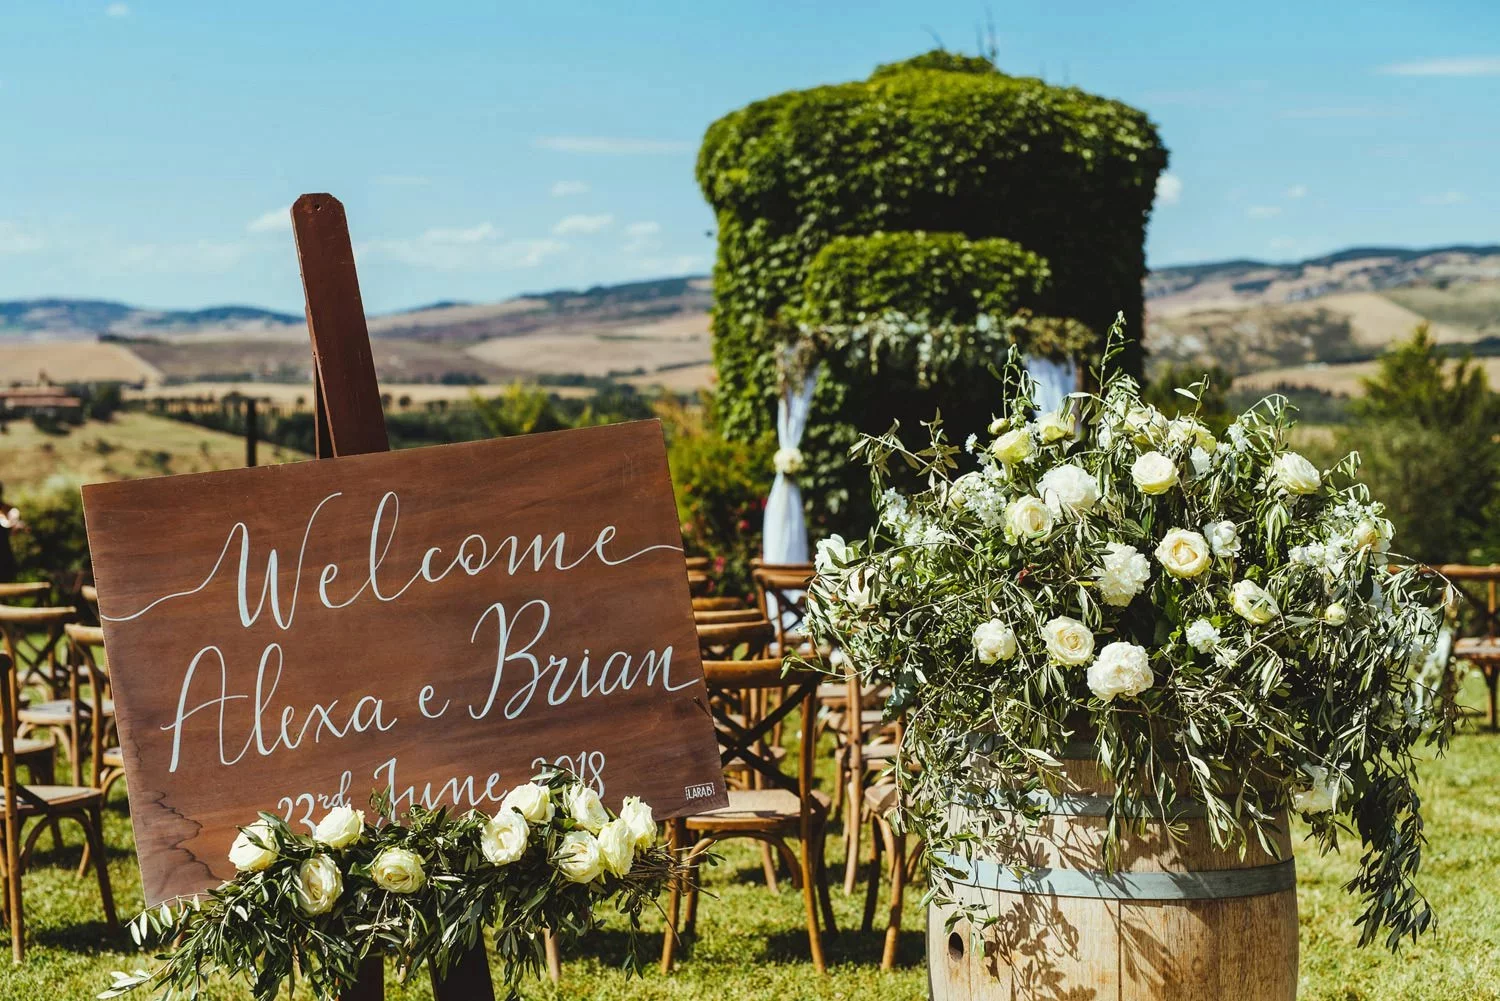 A sign reads 'Welcome Alexa e Brian' at a beautiful outdoor wedding ceremony in Tuscan.